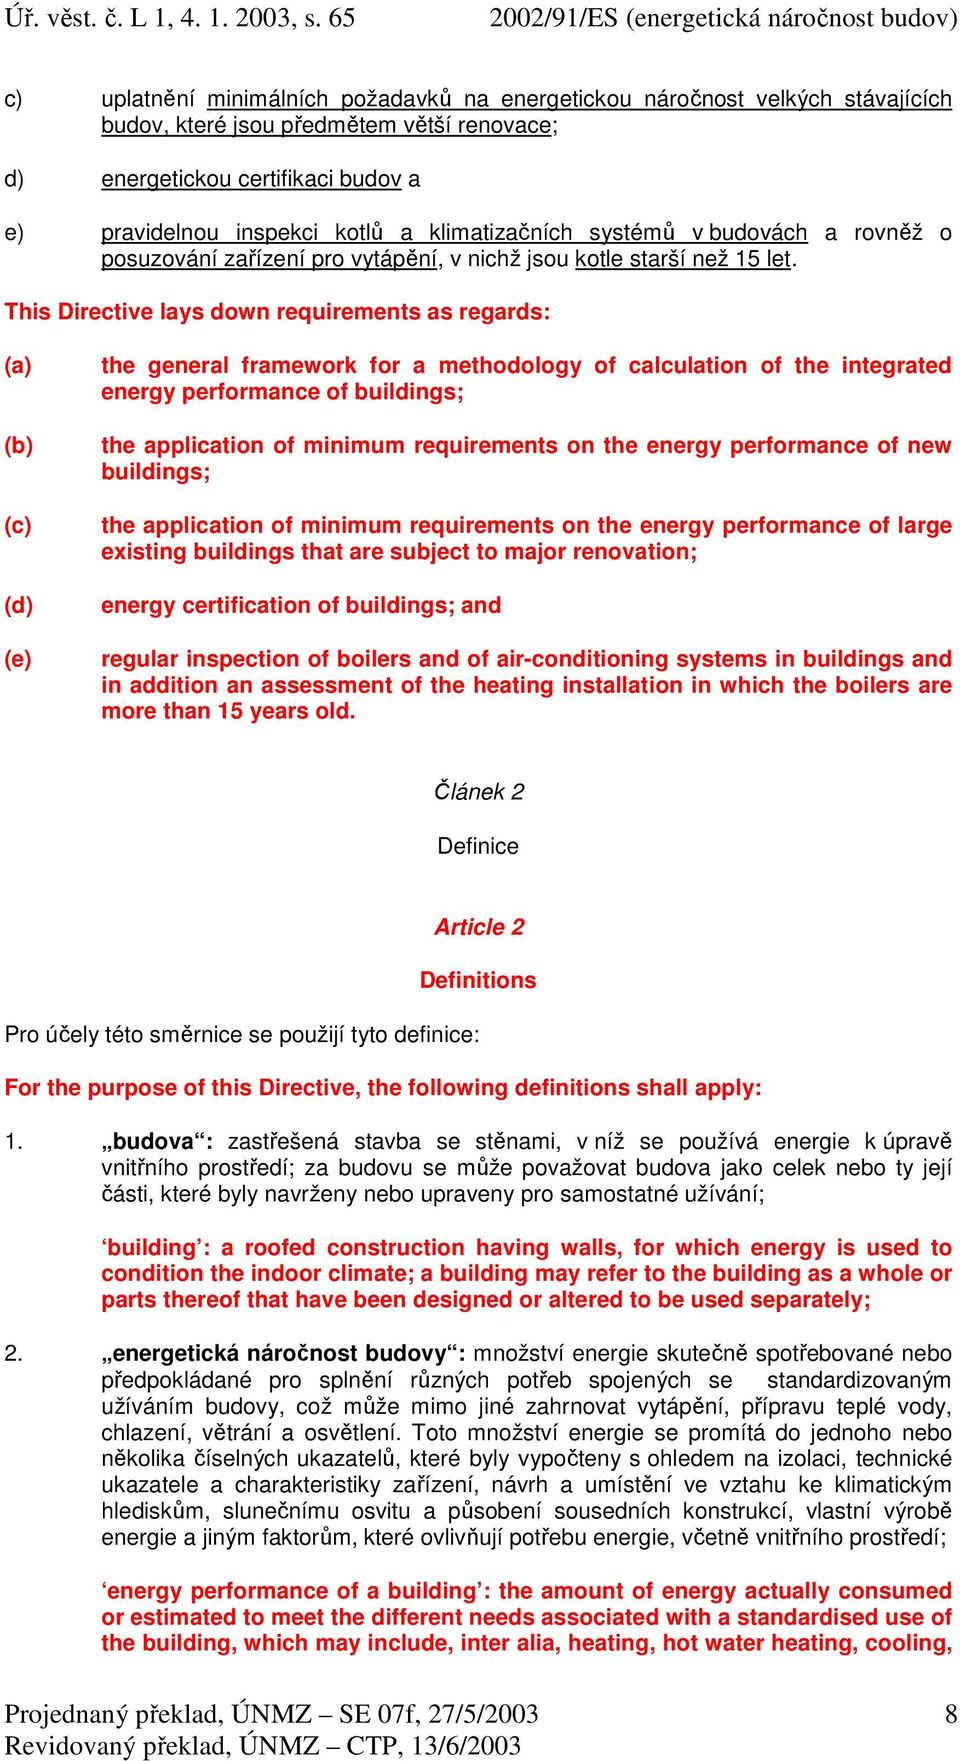 This Directive lays down requirements as regards: (a) (b) (c) (d) (e) the general framework for a methodology of calculation of the integrated energy performance of buildings; the application of